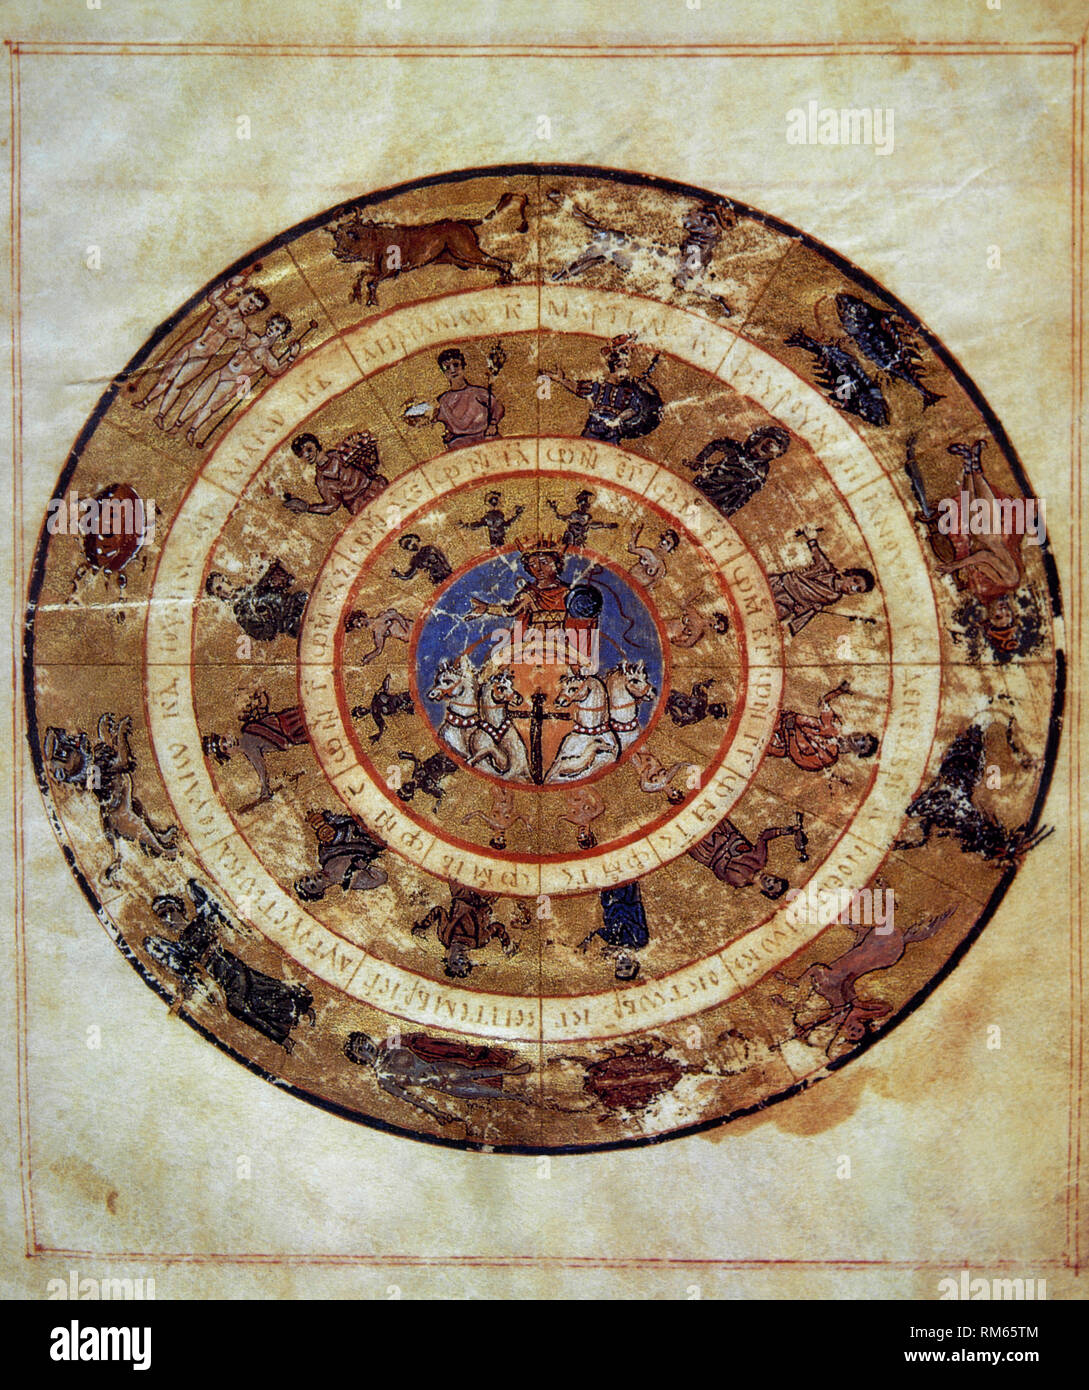 Vaticanus gr. 1291 or Vat. gr. 1291. Is the oldest copy of the tables that has been preserved. It dates from 813-820 AD (Reign of Pope Leon V). Manuscript copy of Ptolomy's so-called 'Handy Tables'. Astronomical table. Helios in his chariot. Fol 9r. Vatican Apostolic Library, Vatican city. Stock Photo